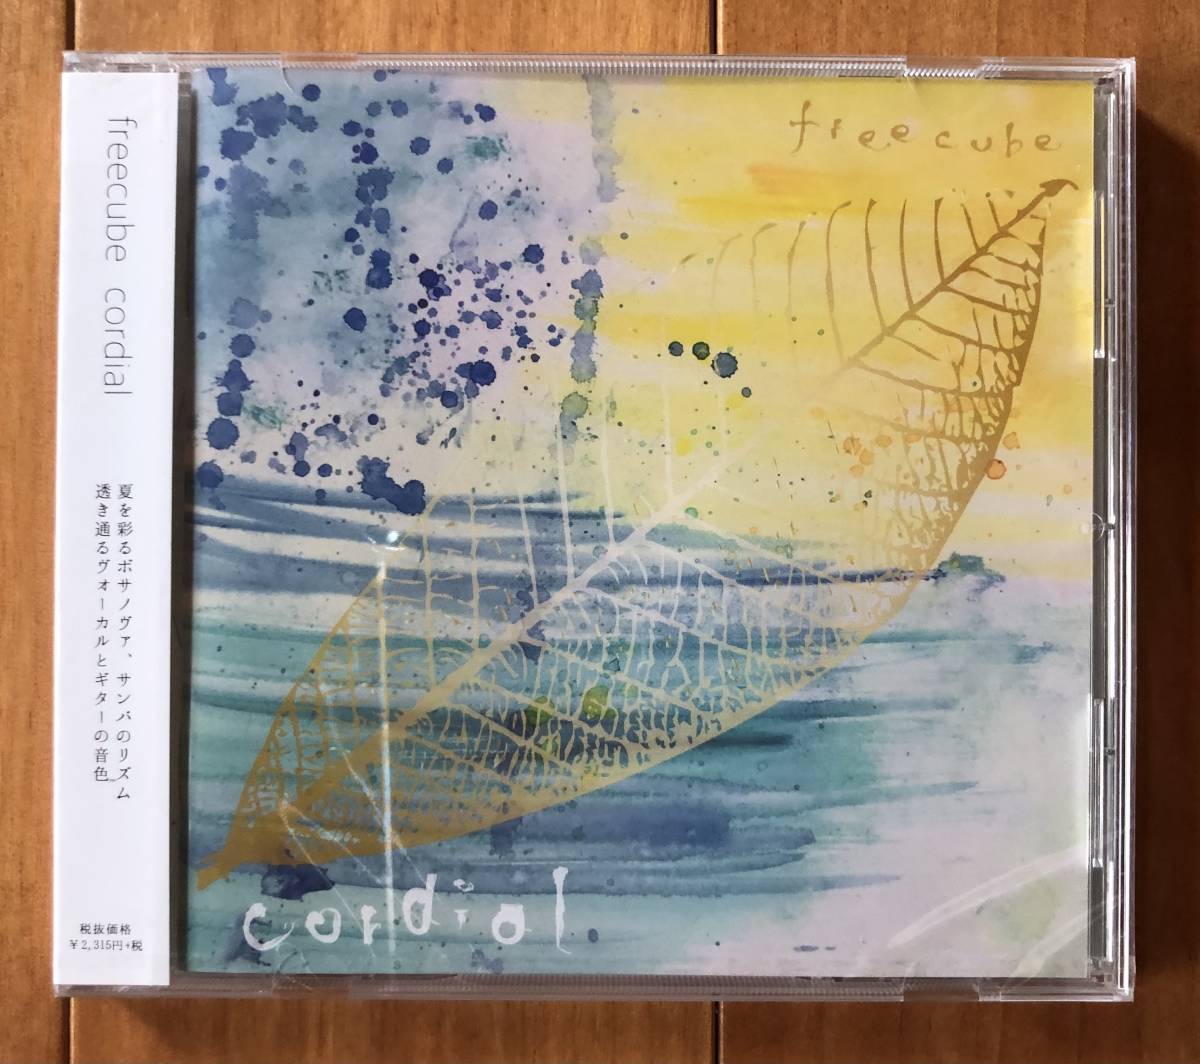 CD-July / disk Union_DIW Products / Playright / freecube cordial : freecube are エミコ　and c.j._画像1